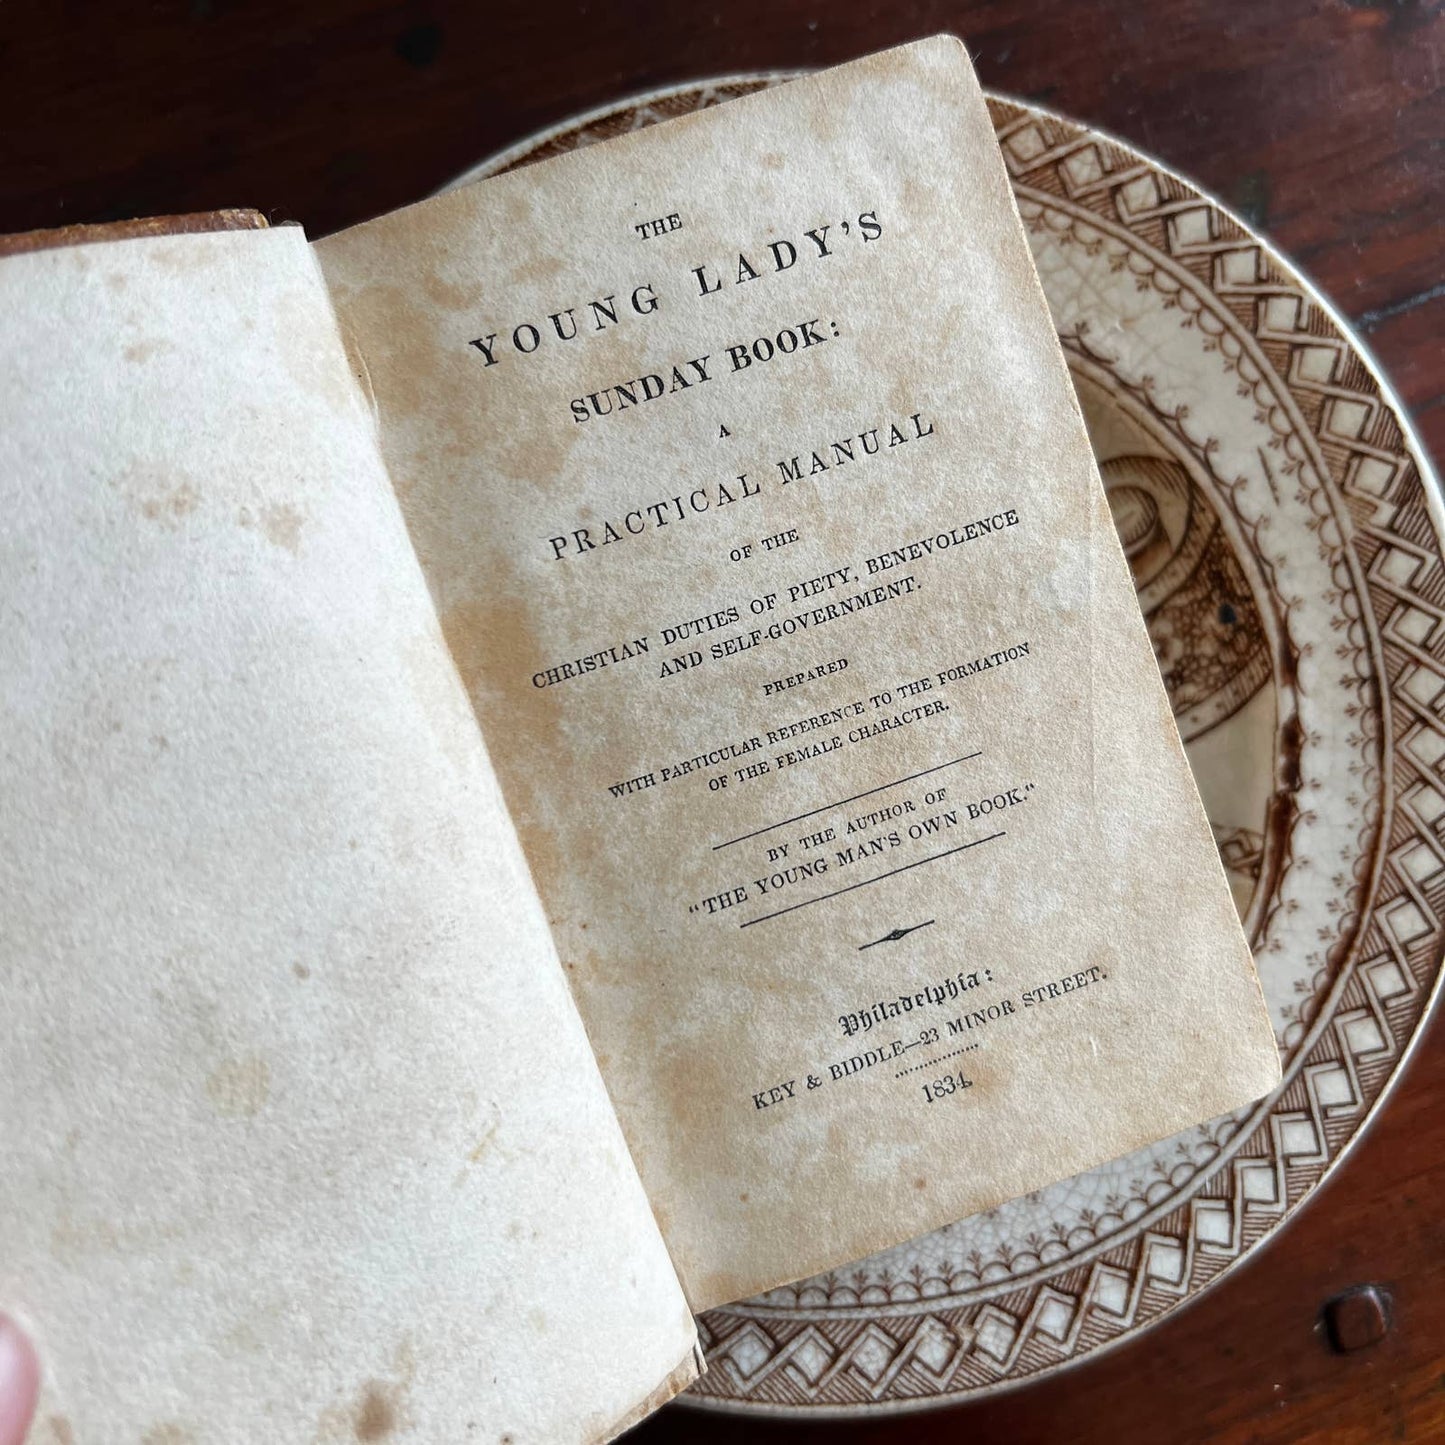 The Young Lady's Sunday Book - Key and Biddle, 1834